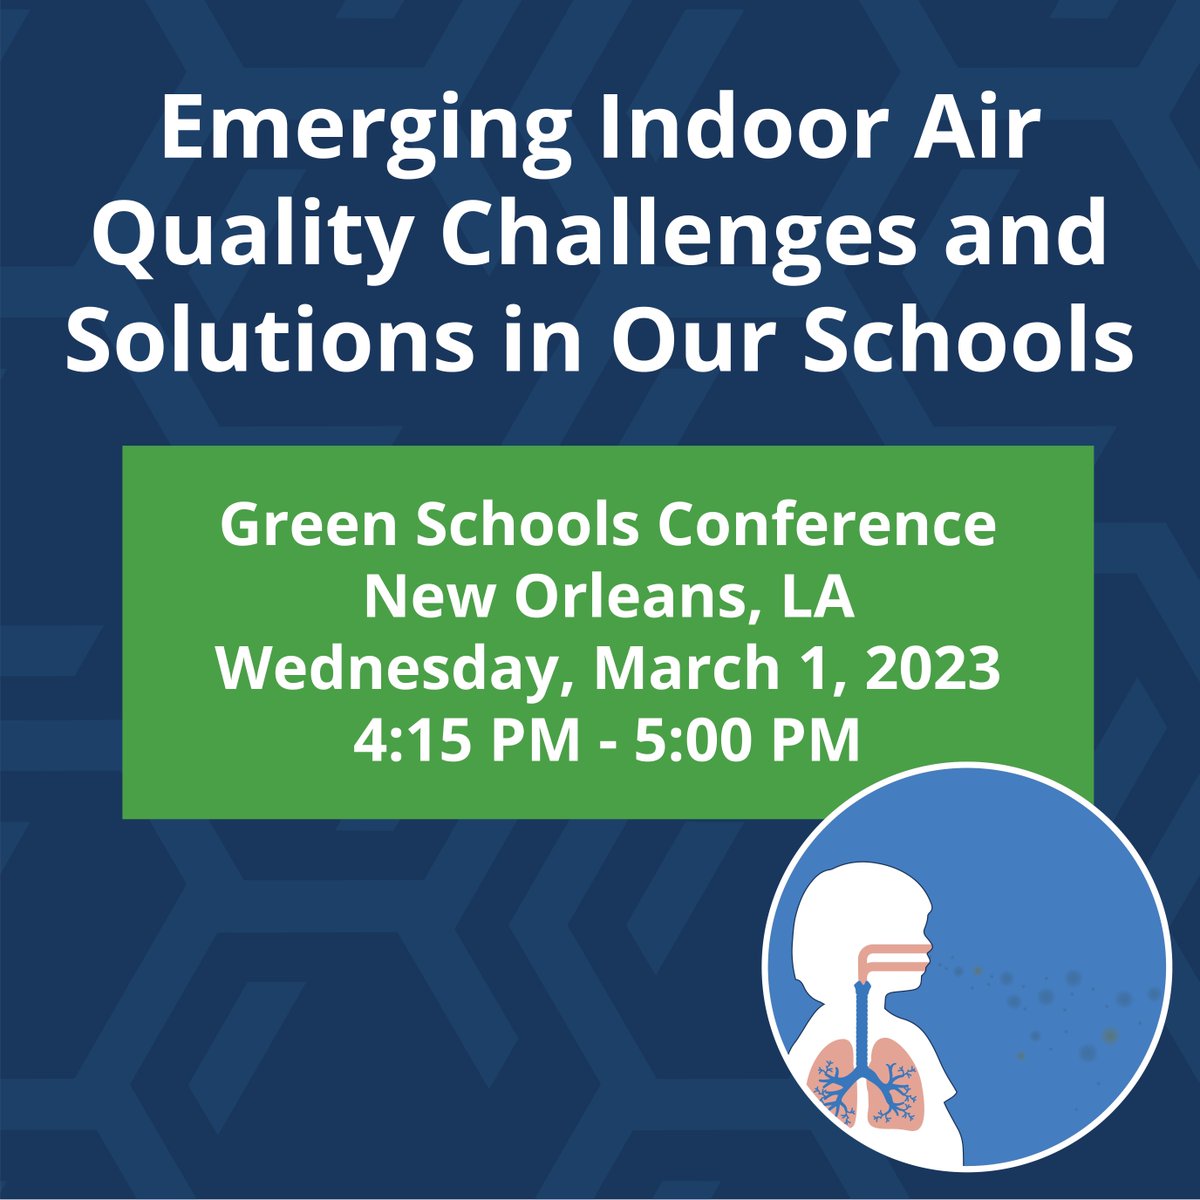 @greenschoolscon attendees: We hope you’ll join us TODAY at 4:15 PM for a discussion on emerging challenges to #indoorairquality in schools and mitigation strategies. #GSC23